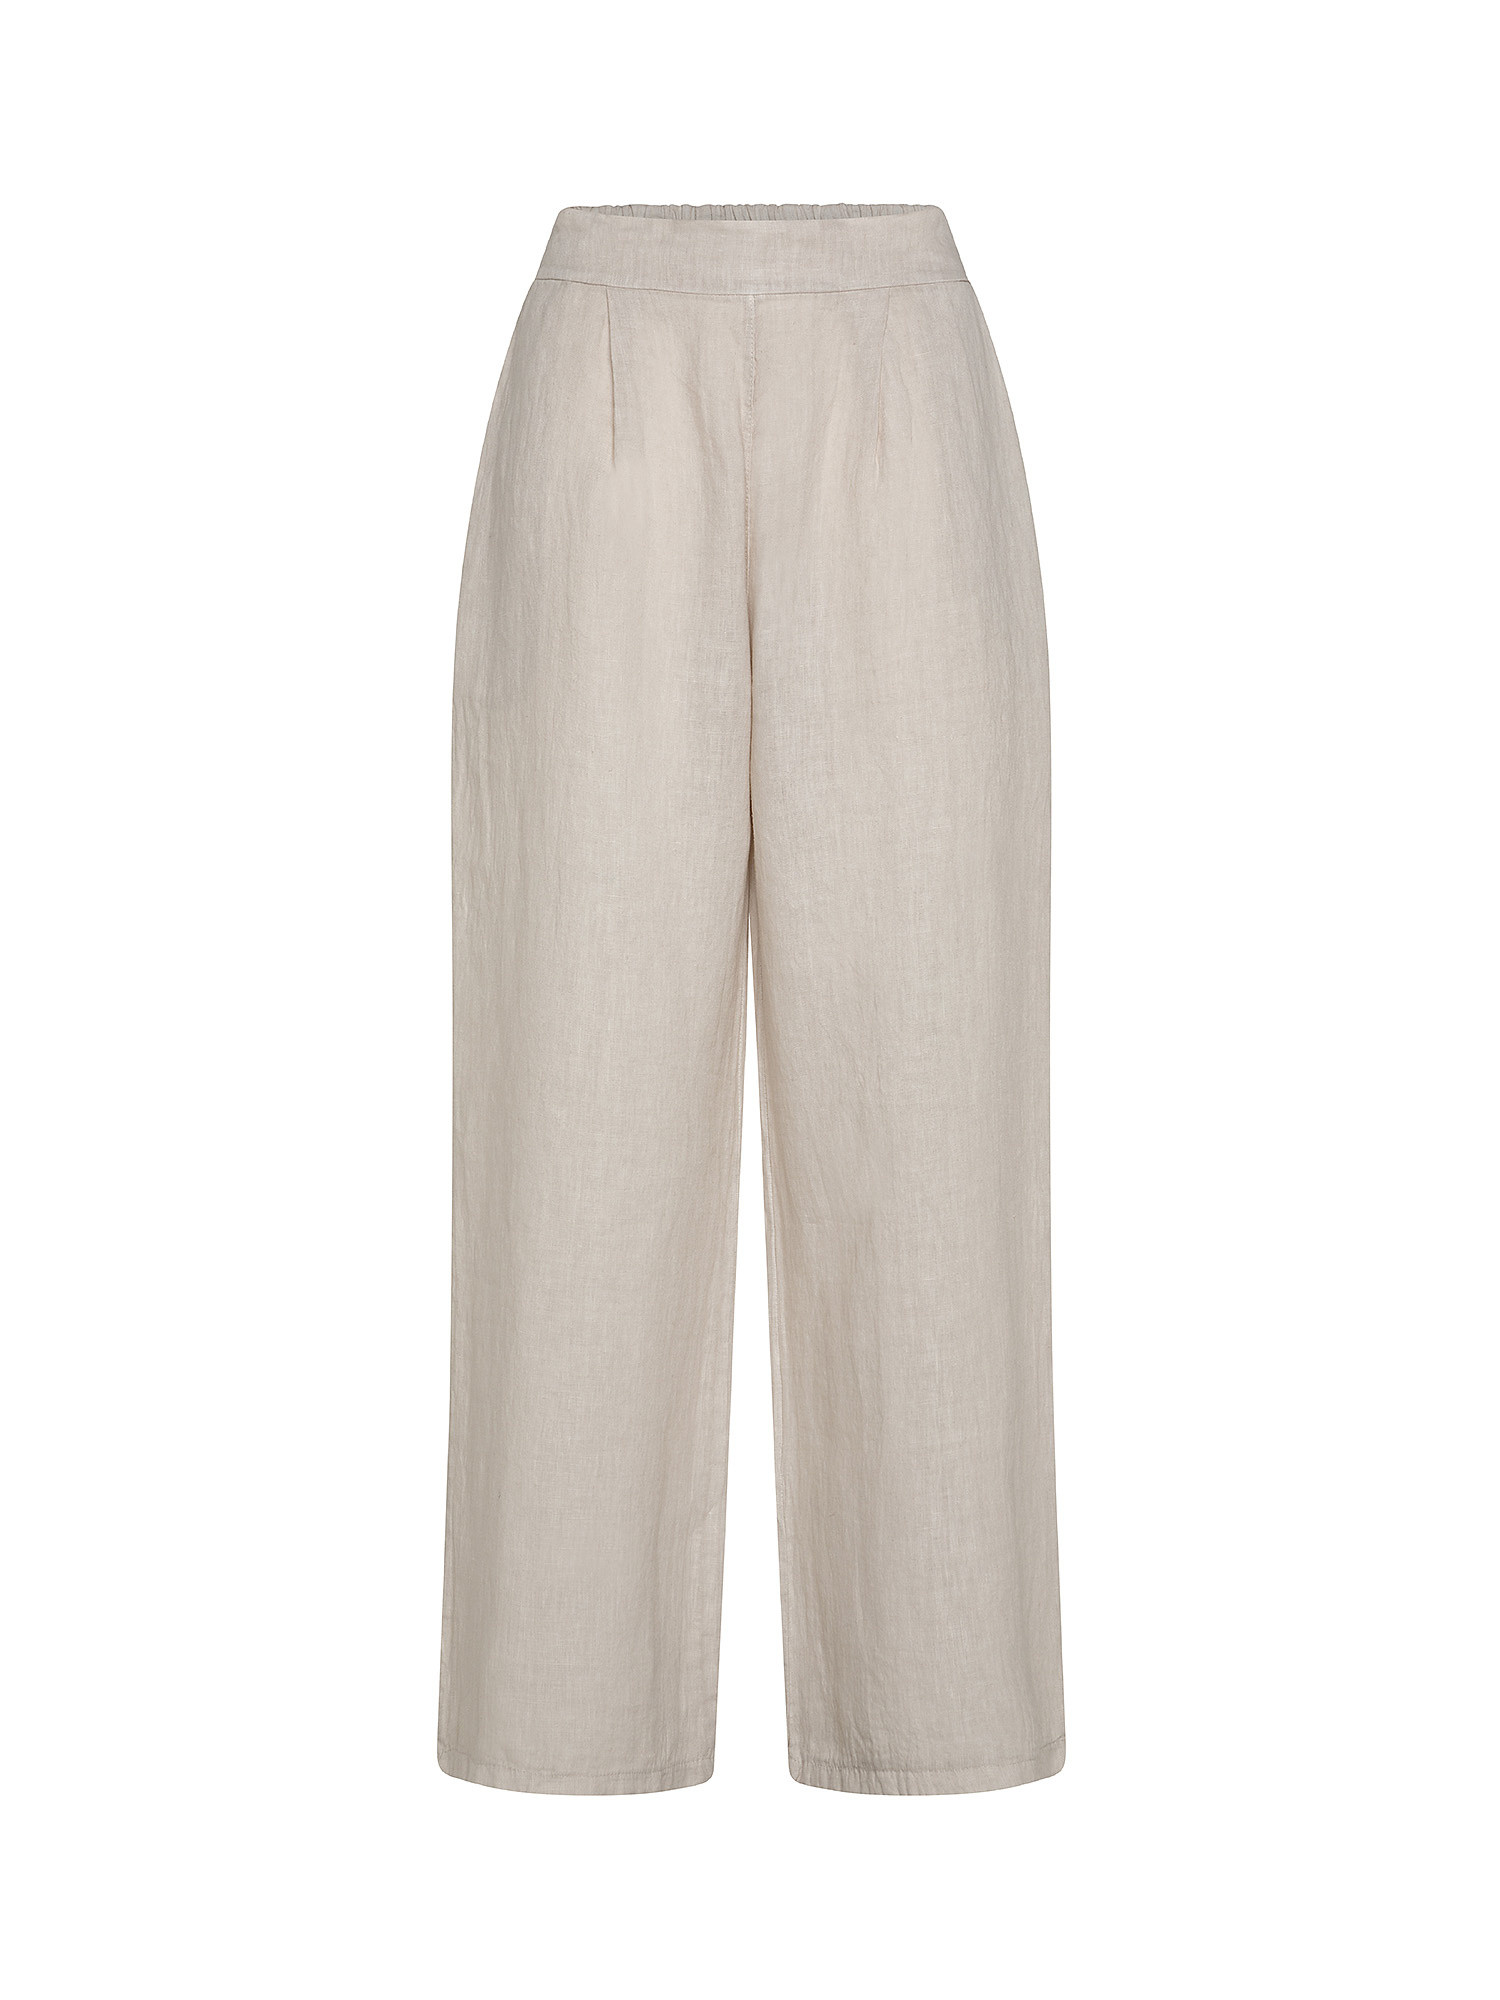 Wide pure linen trousers, Beige, large image number 0